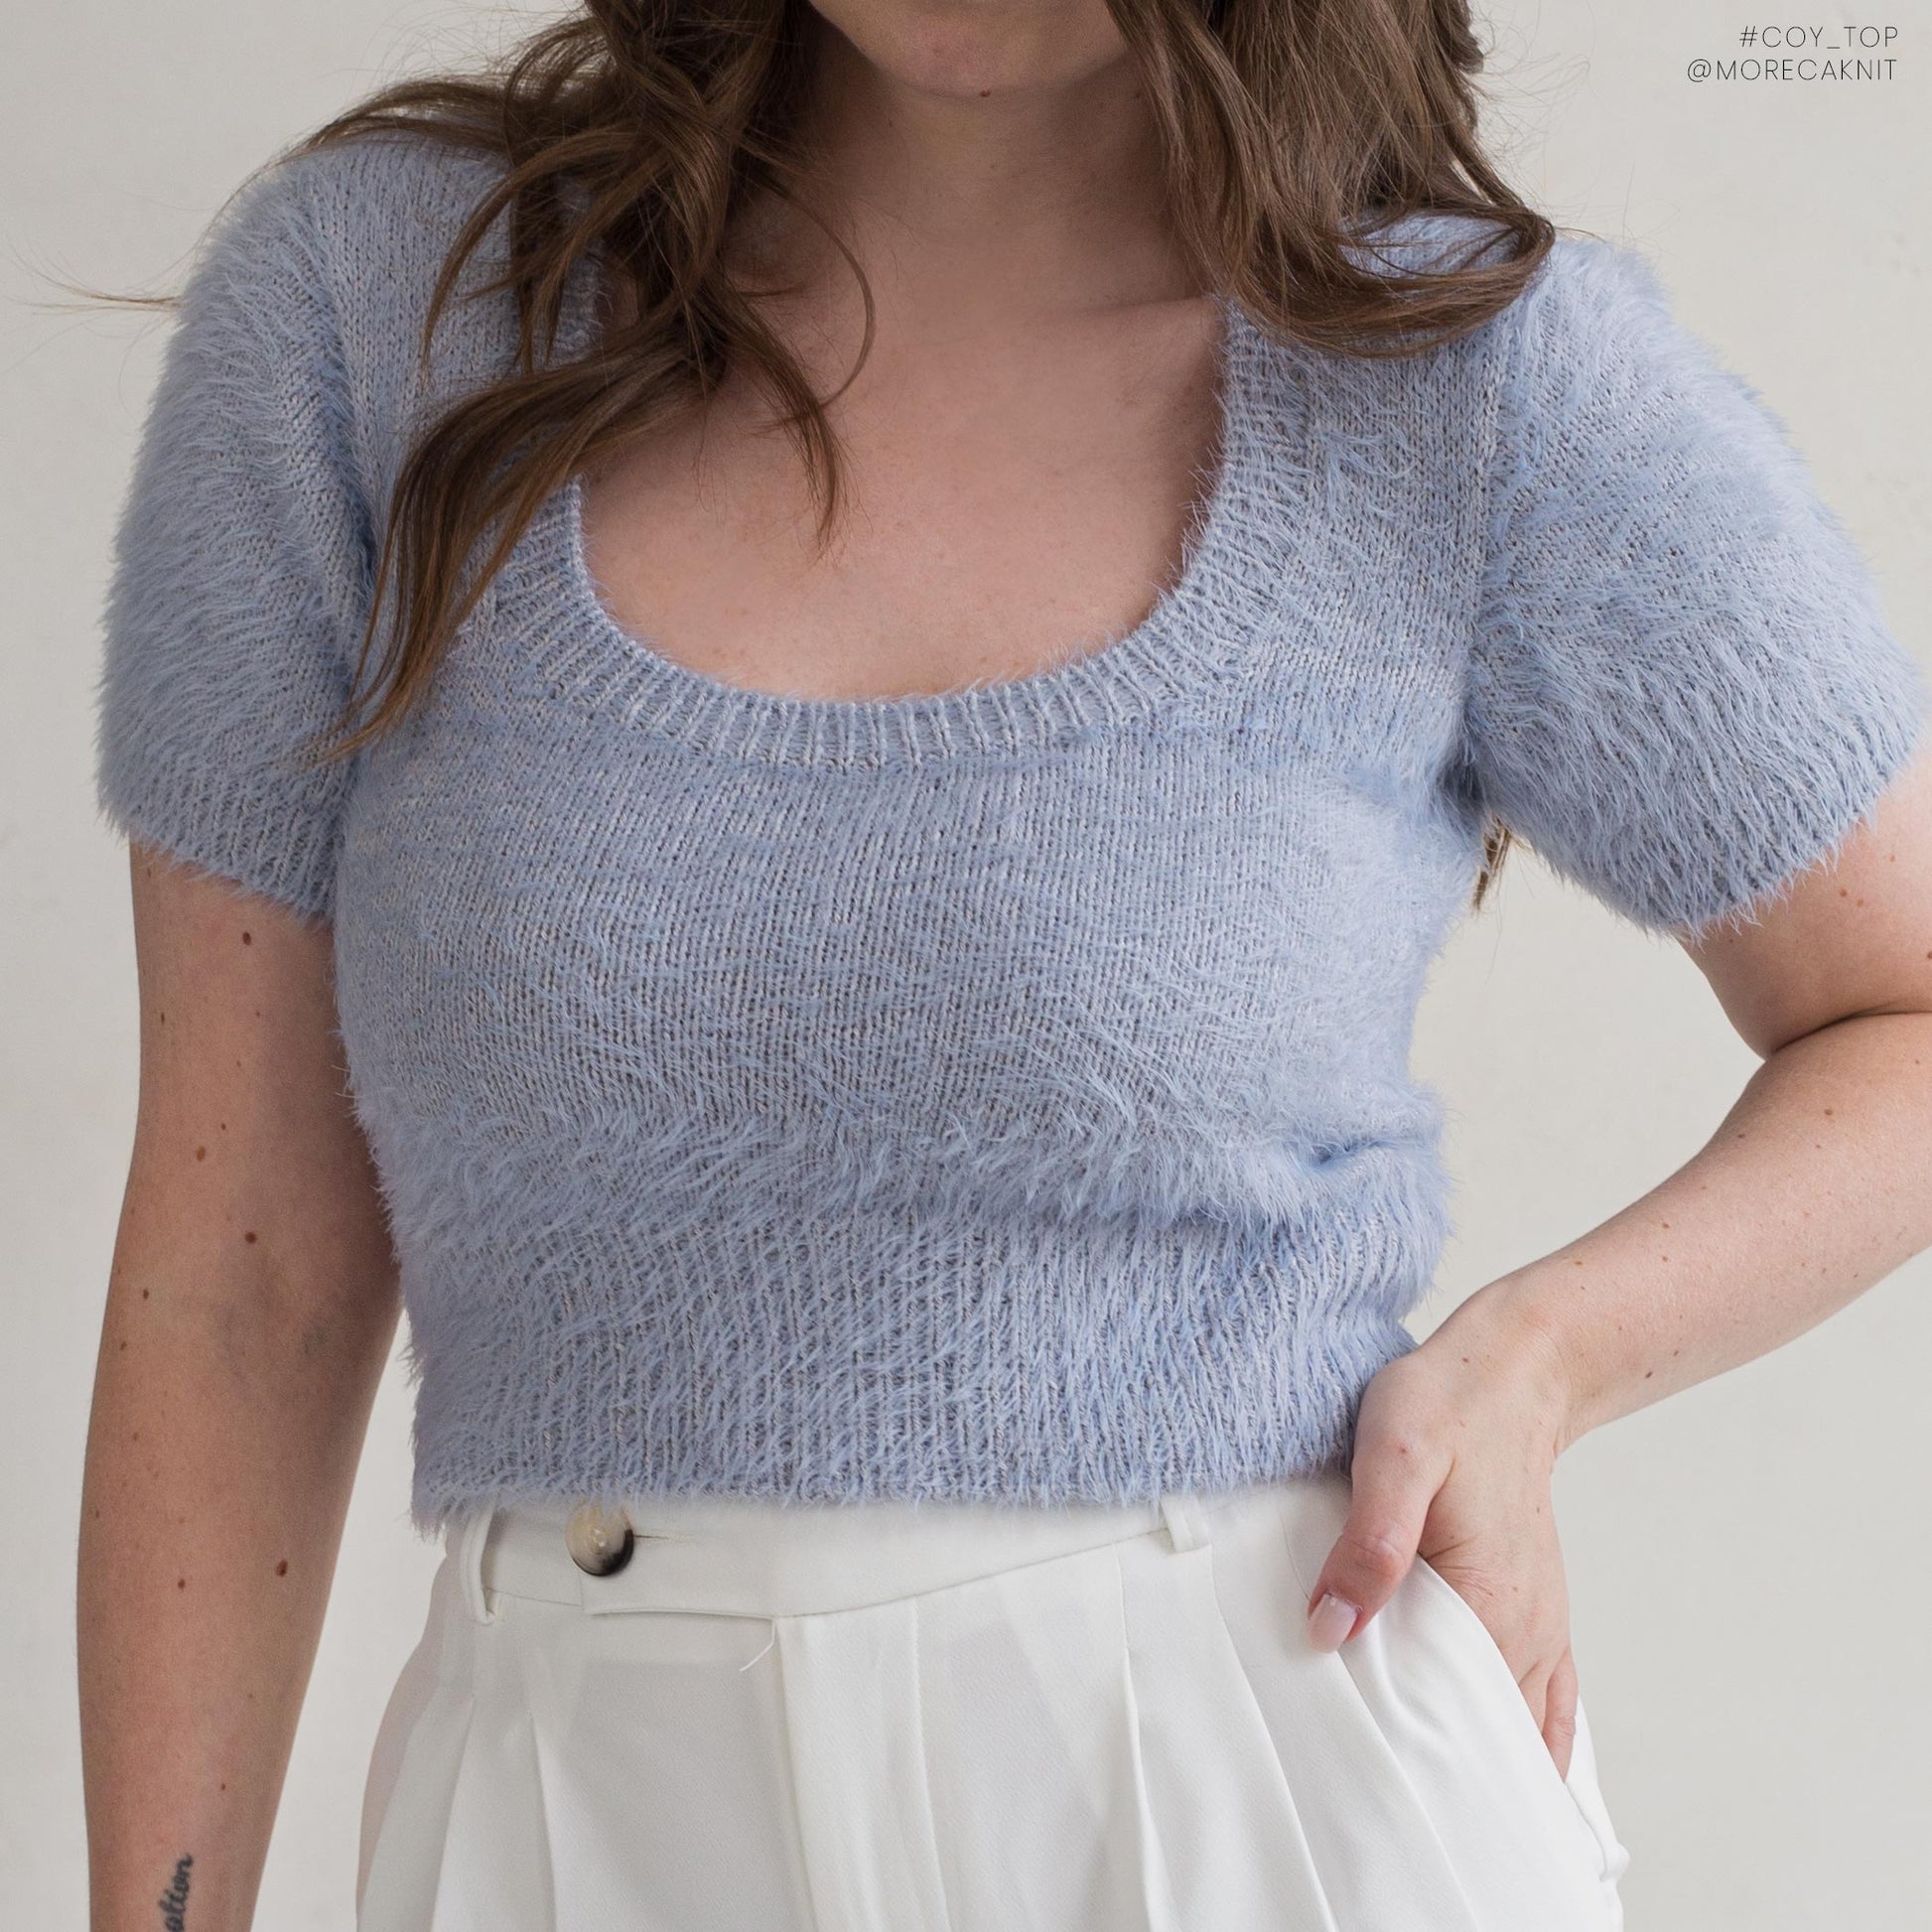 Short-sleeved knitted top with fuzzy texture